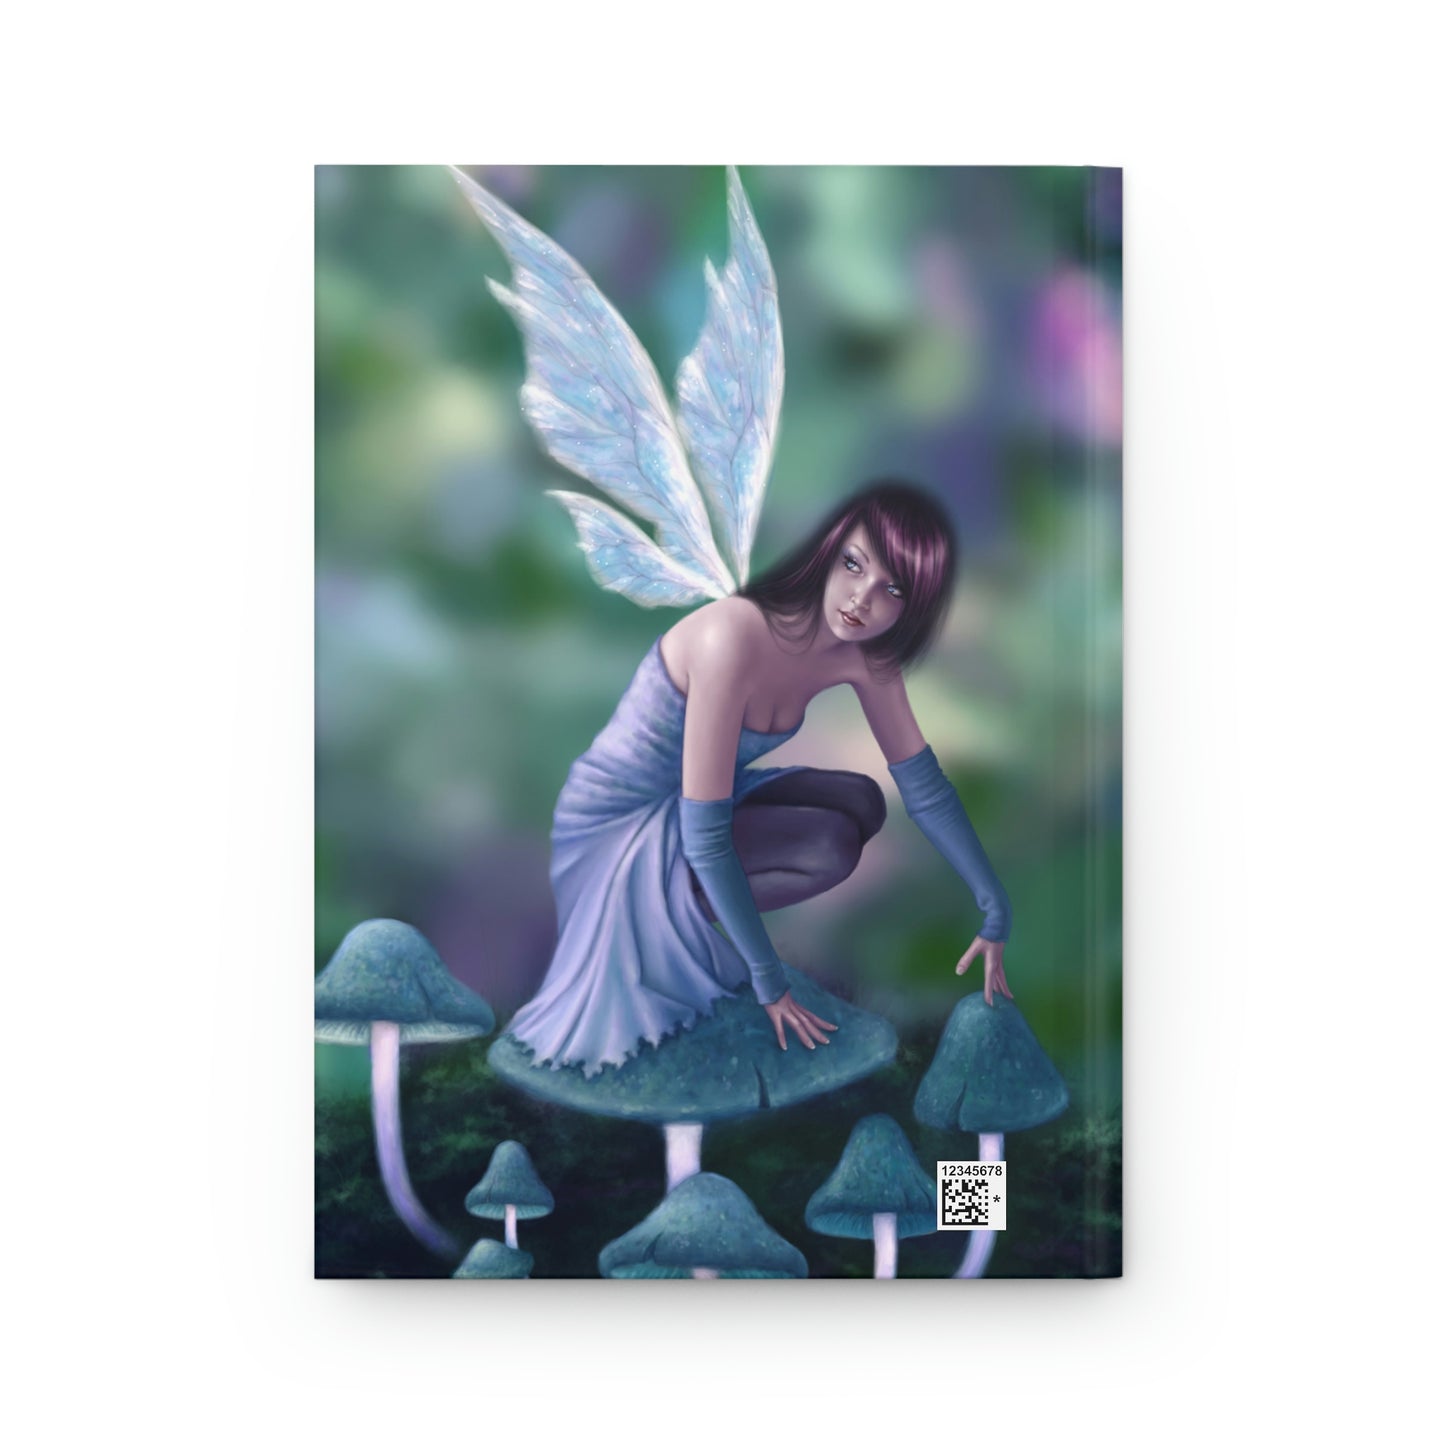 Hardcover Journal - Periwinkle